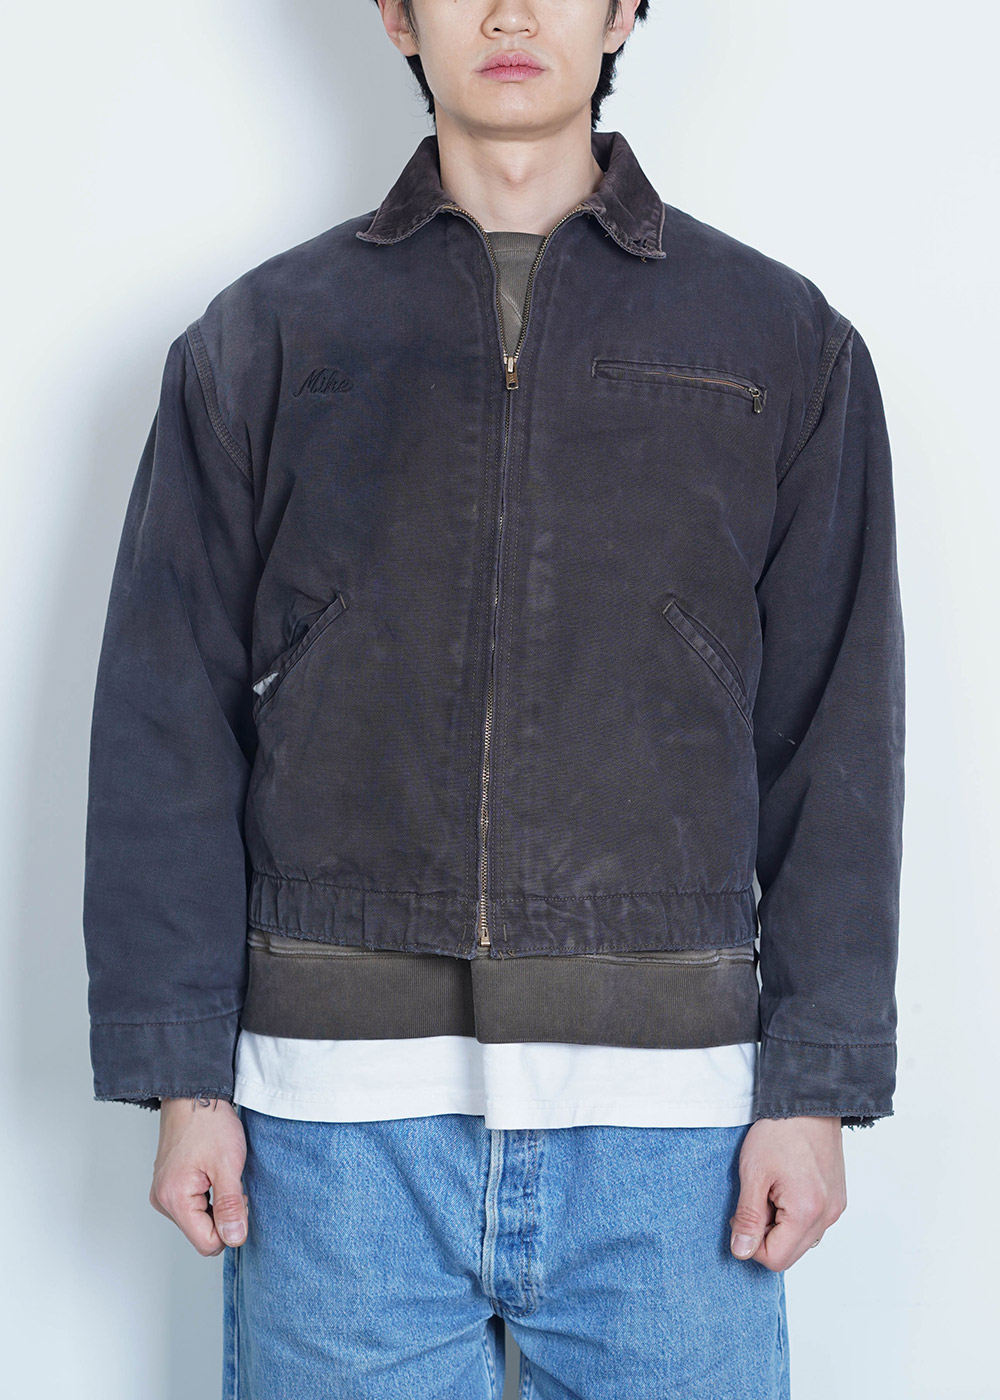 reproduction 043 / carhartt (Overdyed)